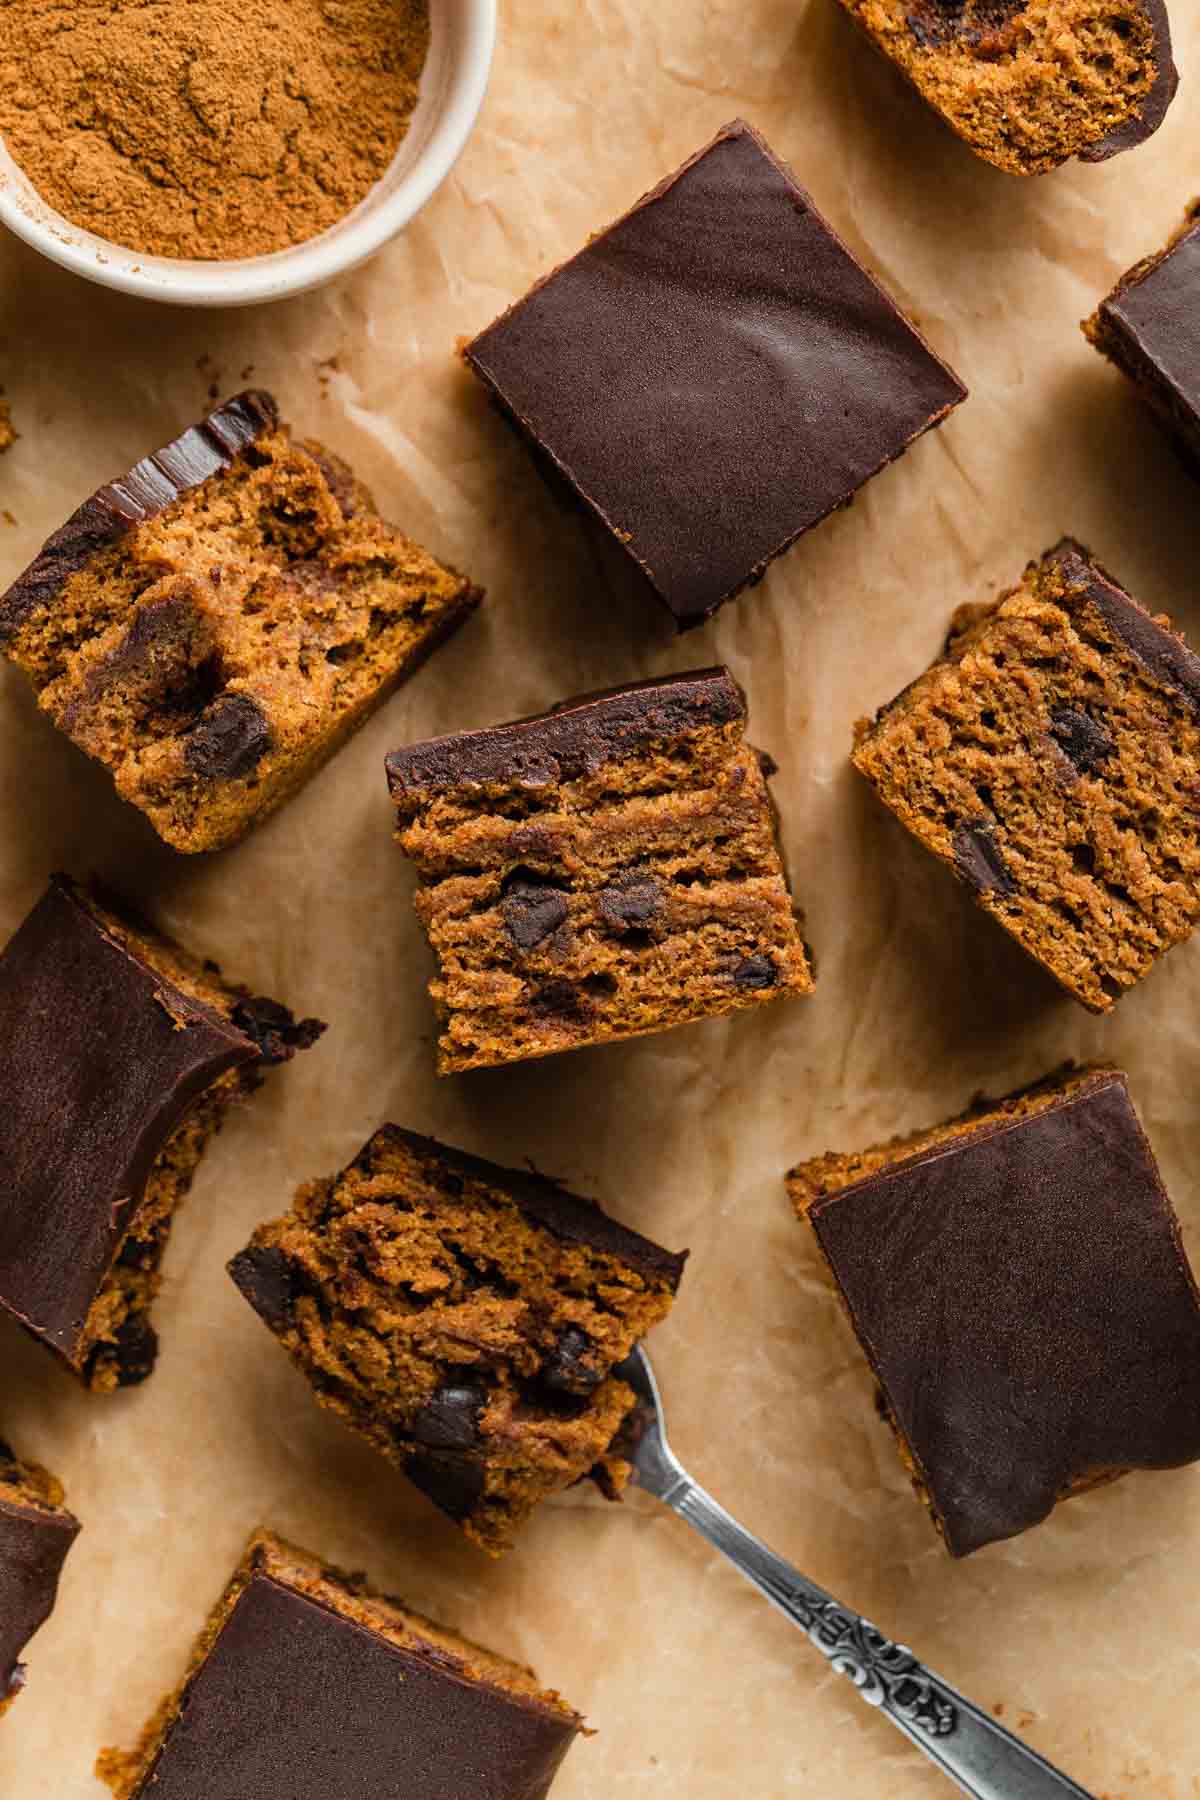 Overhead view of pieces of pumpkin snack cake arranged on a sheet of brown parchment paper.